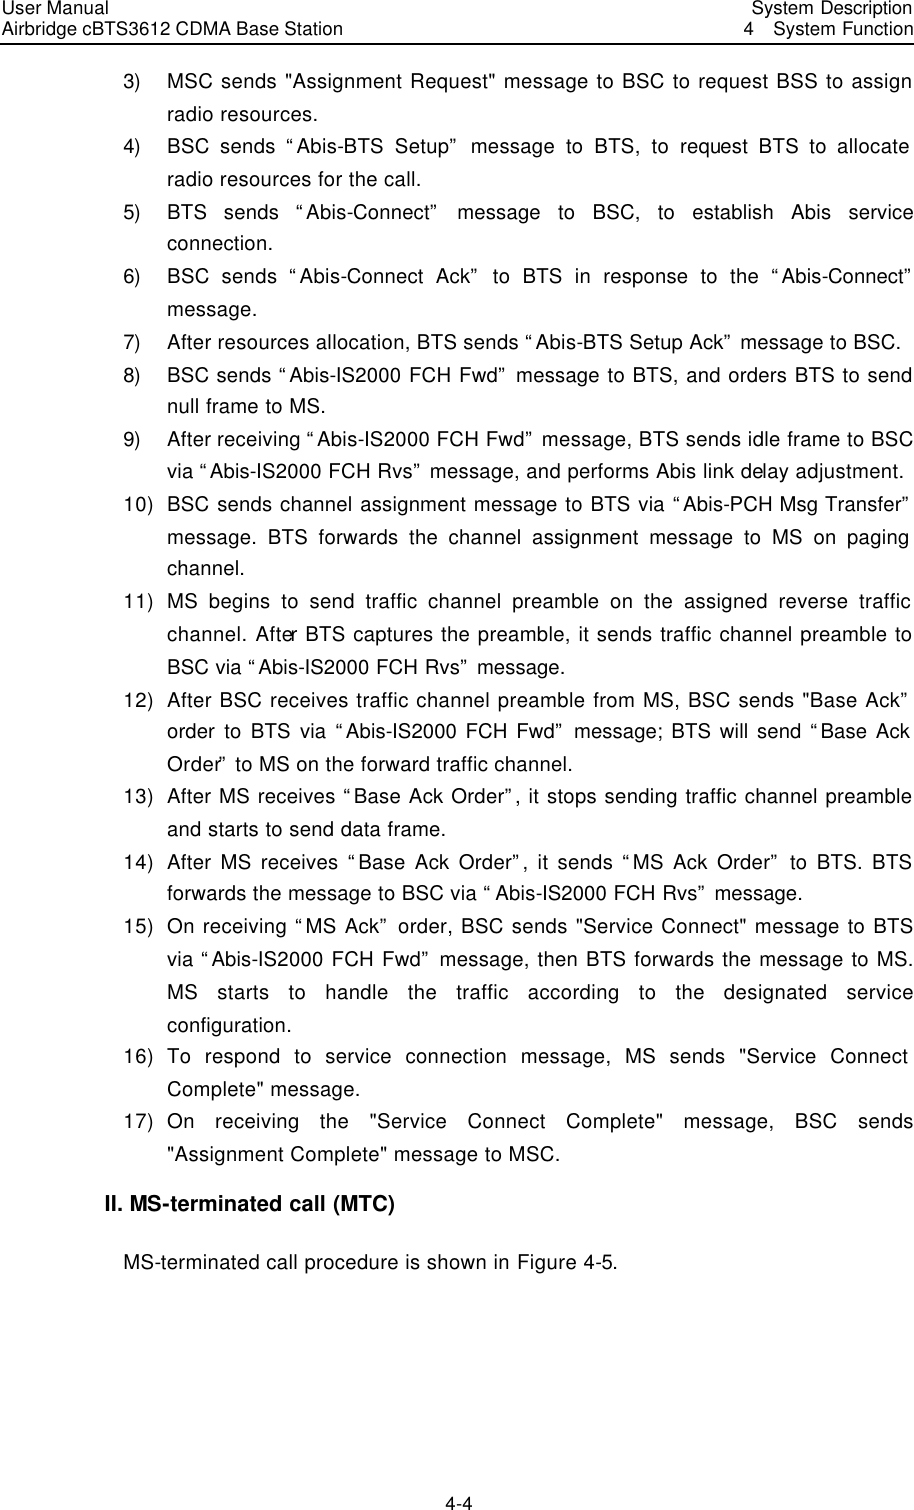 User Manual Airbridge cBTS3612 CDMA Base Station   System Description4  System Function 4-4 3) MSC sends &quot;Assignment Request&quot; message to BSC to request BSS to assign radio resources.   4) BSC sends “Abis-BTS Setup” message to BTS, to request BTS to allocate radio resources for the call.   5) BTS sends “Abis-Connect” message to BSC, to establish Abis service connection.   6) BSC sends “Abis-Connect Ack” to BTS in response to the “Abis-Connect” message.   7) After resources allocation, BTS sends “Abis-BTS Setup Ack” message to BSC.   8) BSC sends “Abis-IS2000 FCH Fwd” message to BTS, and orders BTS to send null frame to MS.   9) After receiving “Abis-IS2000 FCH Fwd” message, BTS sends idle frame to BSC via “Abis-IS2000 FCH Rvs” message, and performs Abis link delay adjustment.   10) BSC sends channel assignment message to BTS via “Abis-PCH Msg Transfer” message. BTS forwards the channel assignment message to MS on paging channel.   11) MS begins to send traffic channel preamble on the assigned reverse traffic channel. After BTS captures the preamble, it sends traffic channel preamble to BSC via “Abis-IS2000 FCH Rvs” message. 12) After BSC receives traffic channel preamble from MS, BSC sends &quot;Base Ack” order to BTS via “Abis-IS2000 FCH Fwd” message; BTS will send “Base Ack Order” to MS on the forward traffic channel.   13) After MS receives “Base Ack Order”, it stops sending traffic channel preamble and starts to send data frame.   14) After MS receives “Base Ack Order”, it sends “MS Ack Order” to BTS. BTS forwards the message to BSC via “Abis-IS2000 FCH Rvs” message. 15) On receiving “MS Ack” order, BSC sends &quot;Service Connect&quot; message to BTS via “Abis-IS2000 FCH Fwd” message, then BTS forwards the message to MS. MS starts to handle the traffic according to the designated service configuration.   16) To respond to service connection message, MS sends &quot;Service Connect Complete&quot; message.   17) On receiving the &quot;Service Connect Complete&quot; message, BSC sends &quot;Assignment Complete&quot; message to MSC.   II. MS-terminated call (MTC) MS-terminated call procedure is shown in Figure 4-5. 